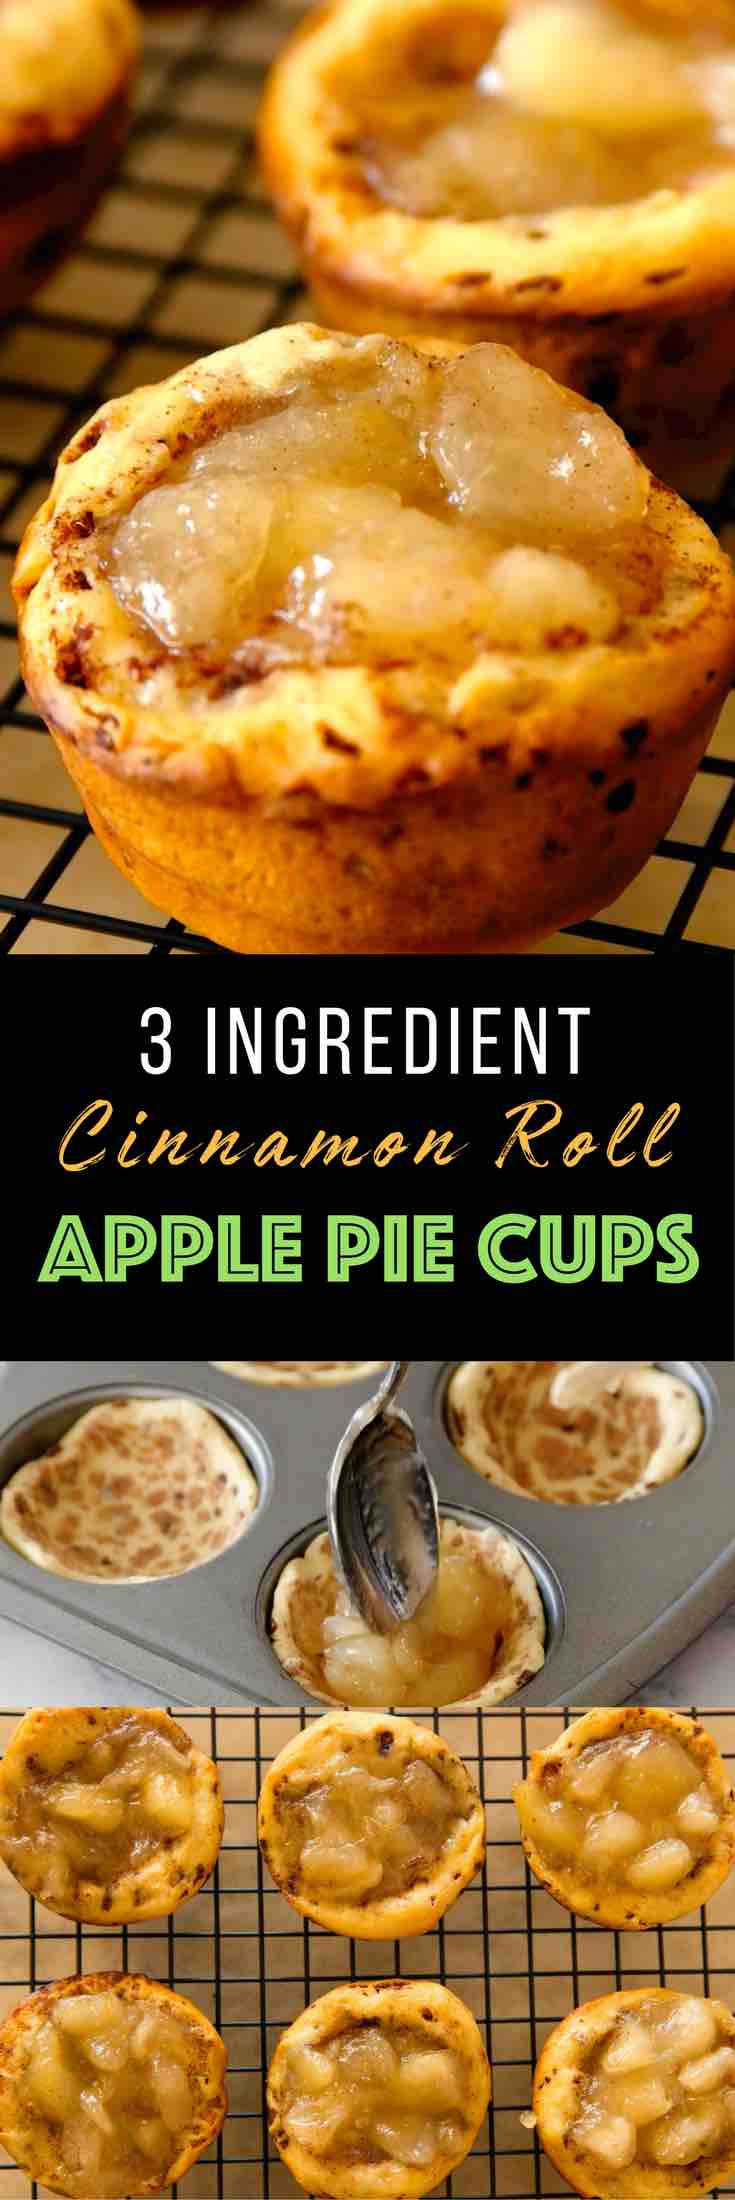 Cinnamon Roll Apple Pie Cups – warm and delicious apple pie filling cooked in cinnamon sugary cinnamon roll cups in a muffin tin. The Easiest dessert that comes together in 20 minutes! Only 3 Ingredients: Cinnamon roll package, apple pie filling and icing. Quick and easy recipe, party desserts. Vegetarian. Video recipe. | Tipbuzz.com